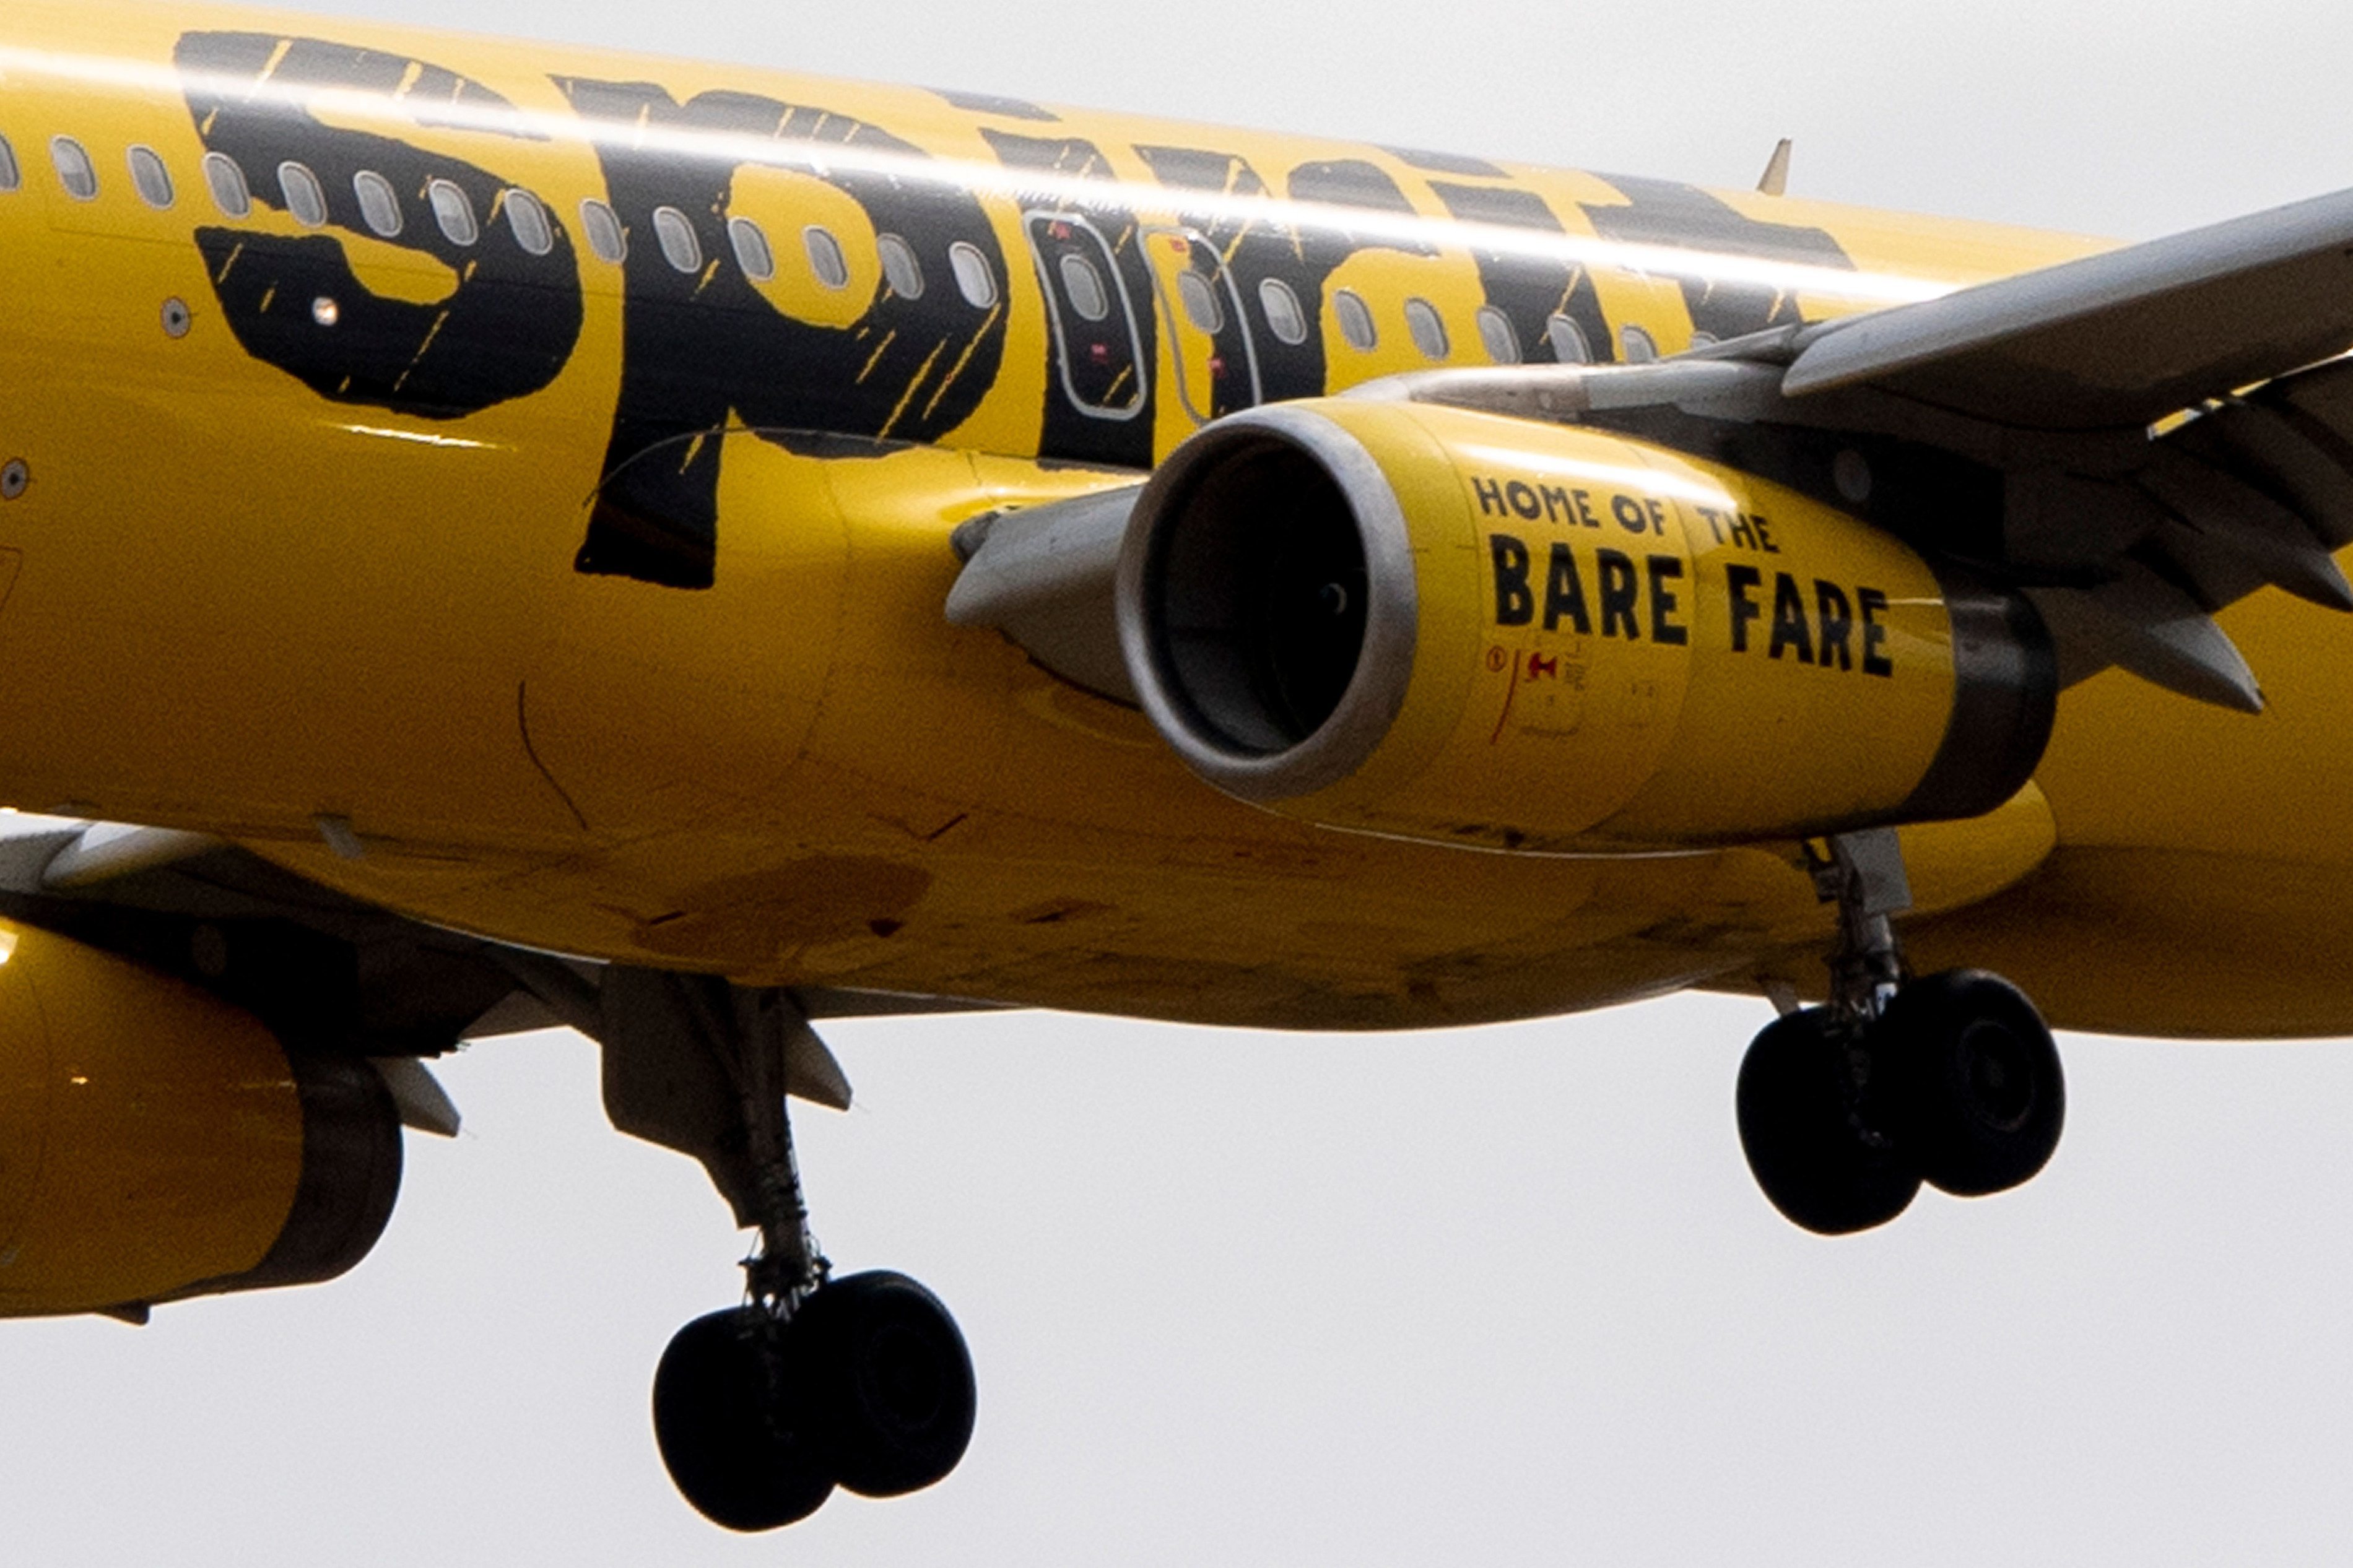 3 Philly women charged with assault for attack on Spirit Airlines employees over delayed flight